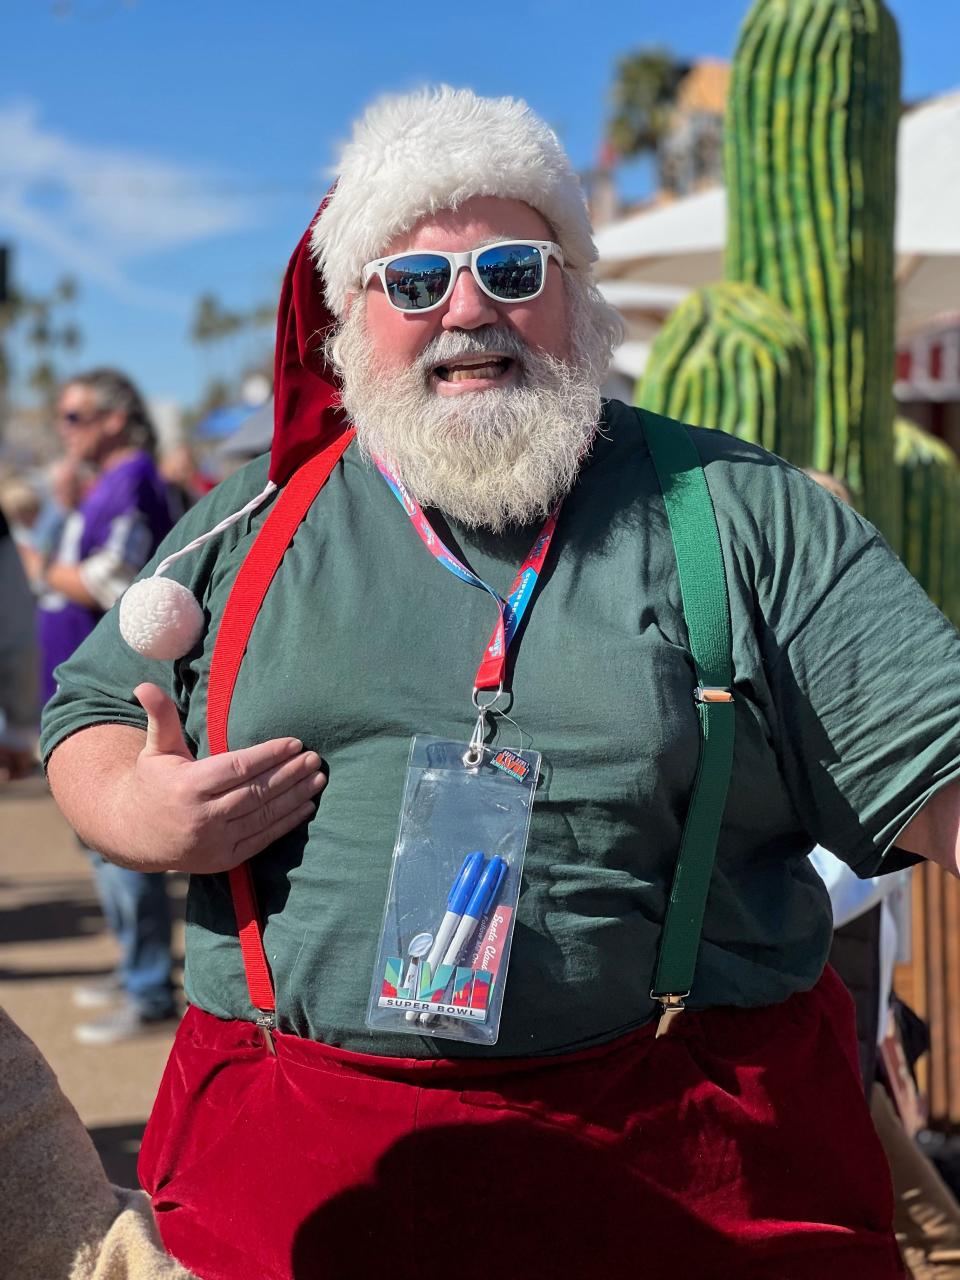 Santa showed up in Old Town Scottsdale at the ESPN tailgate event to root for both teams in Super Bowl 57.